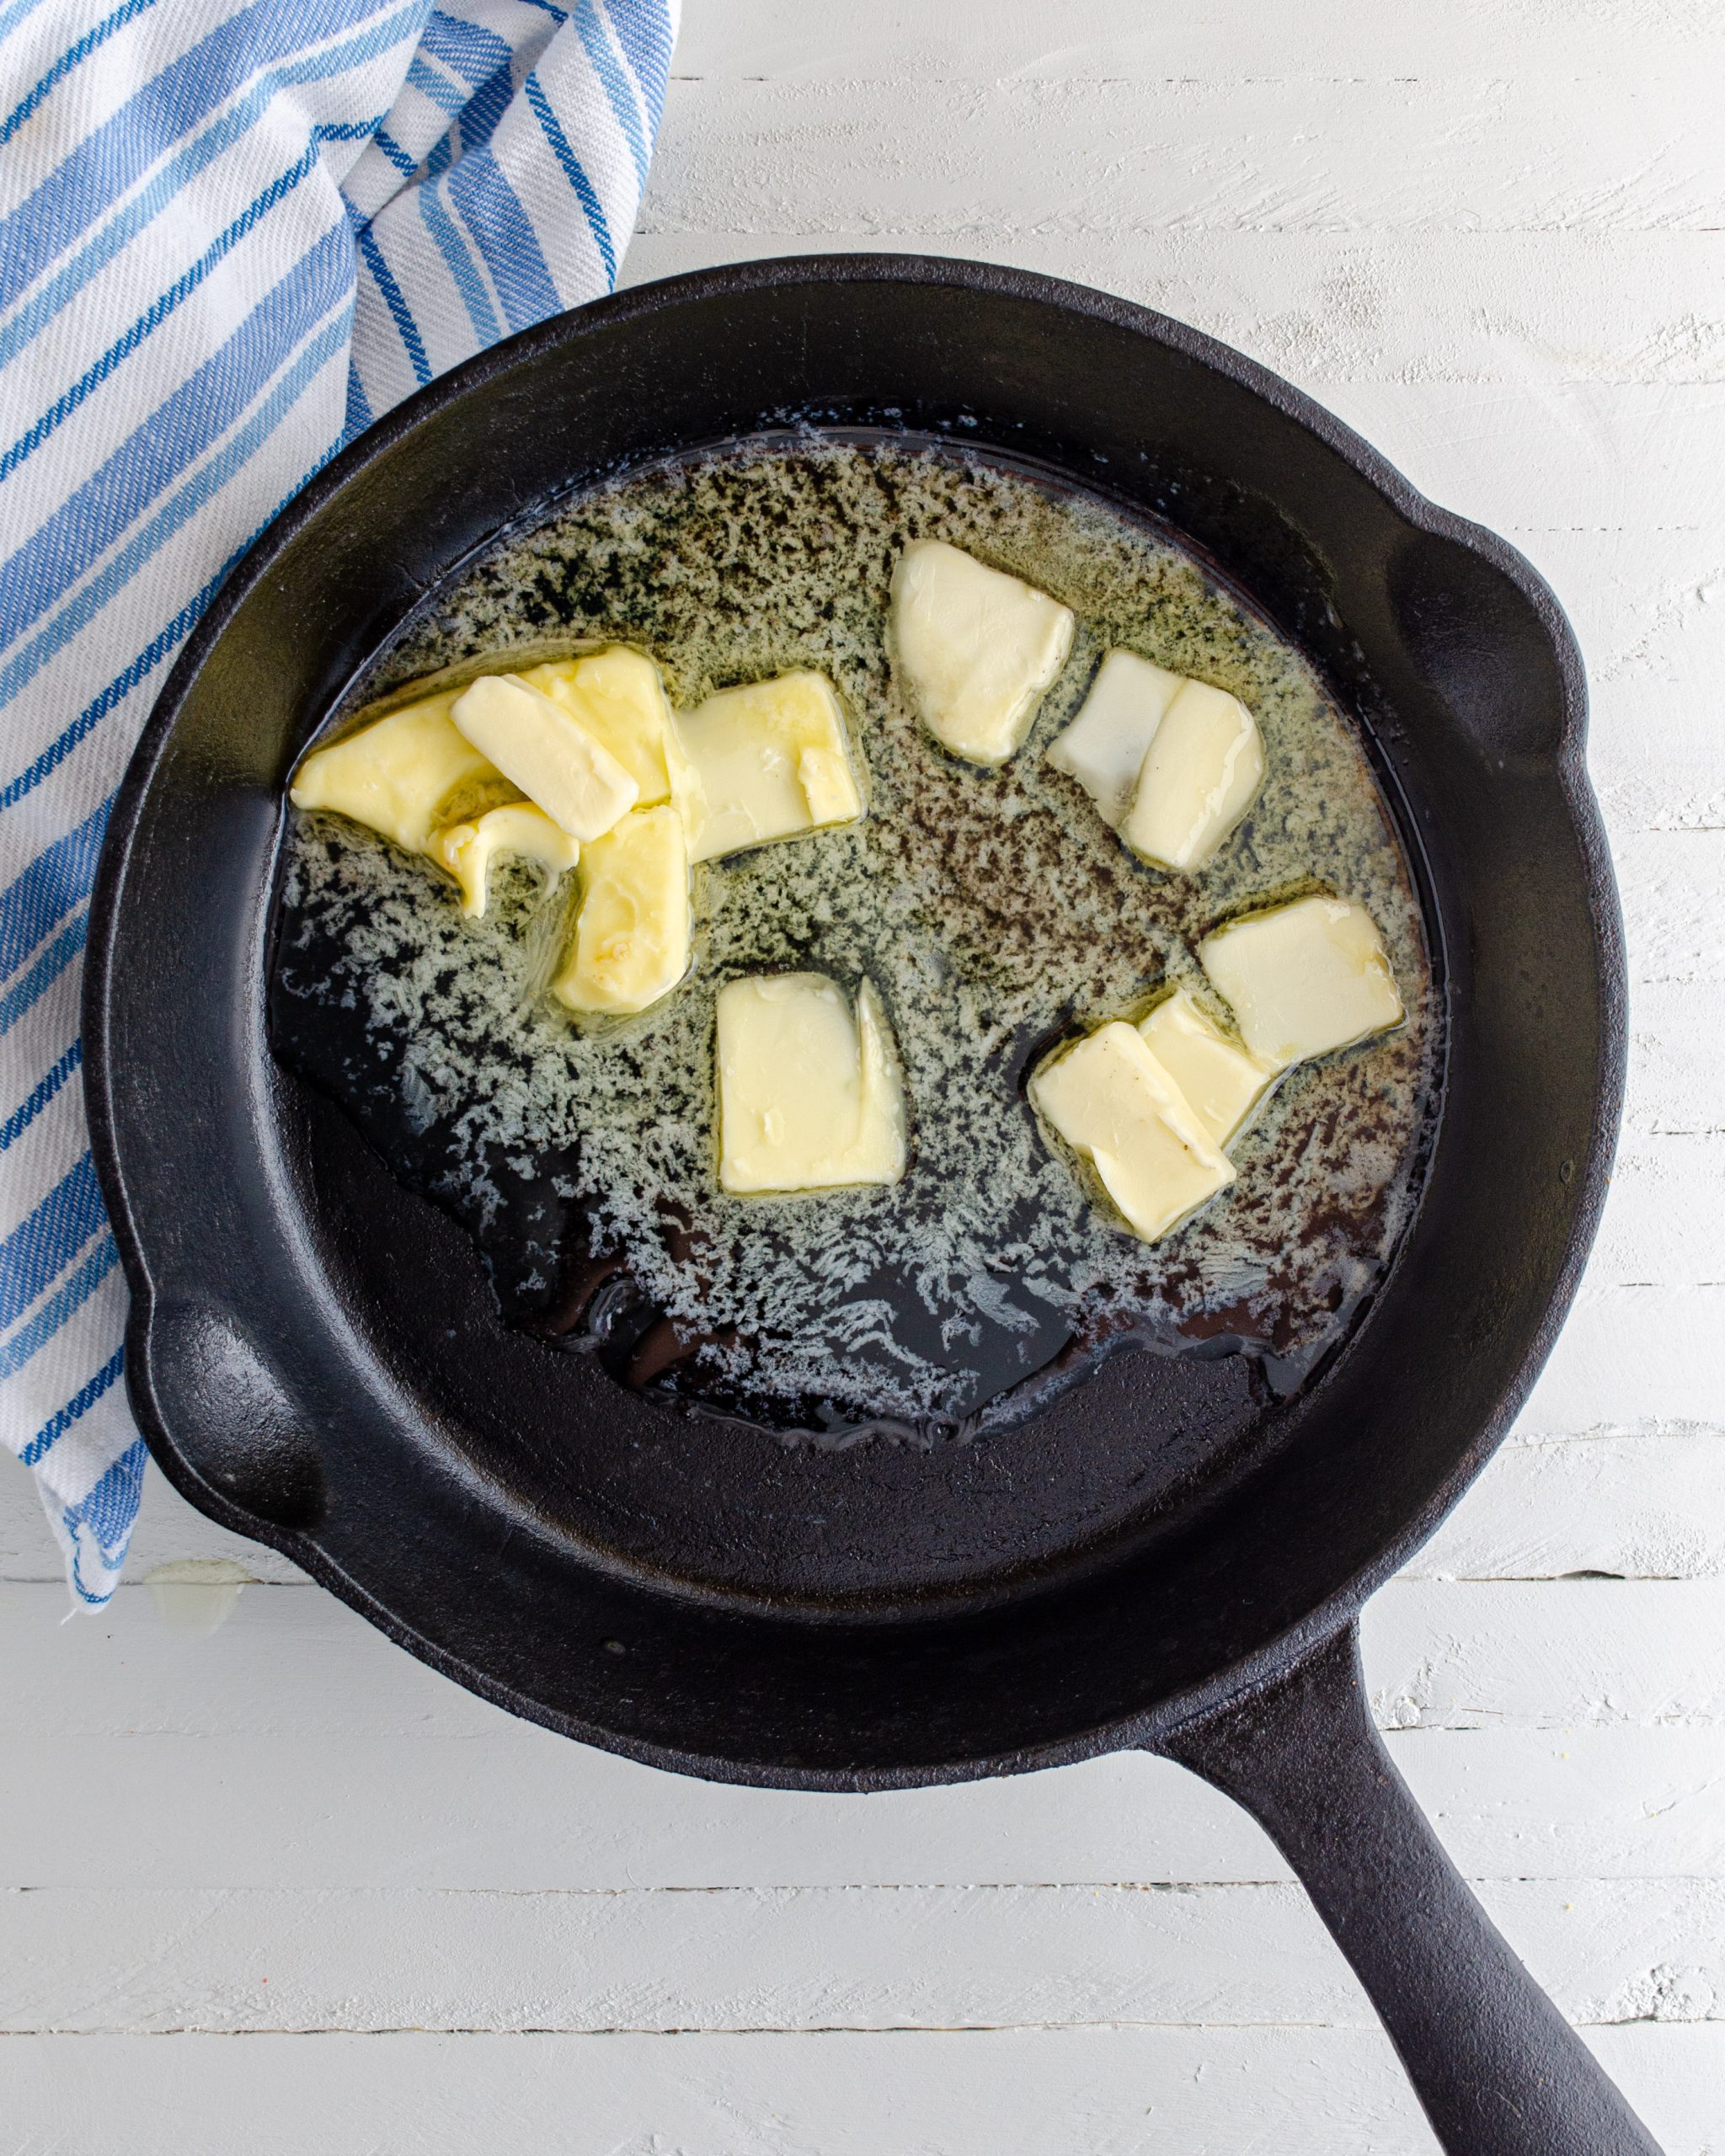 Place the butter into an oven safe skillet on the stove, and melt it over medium heat.